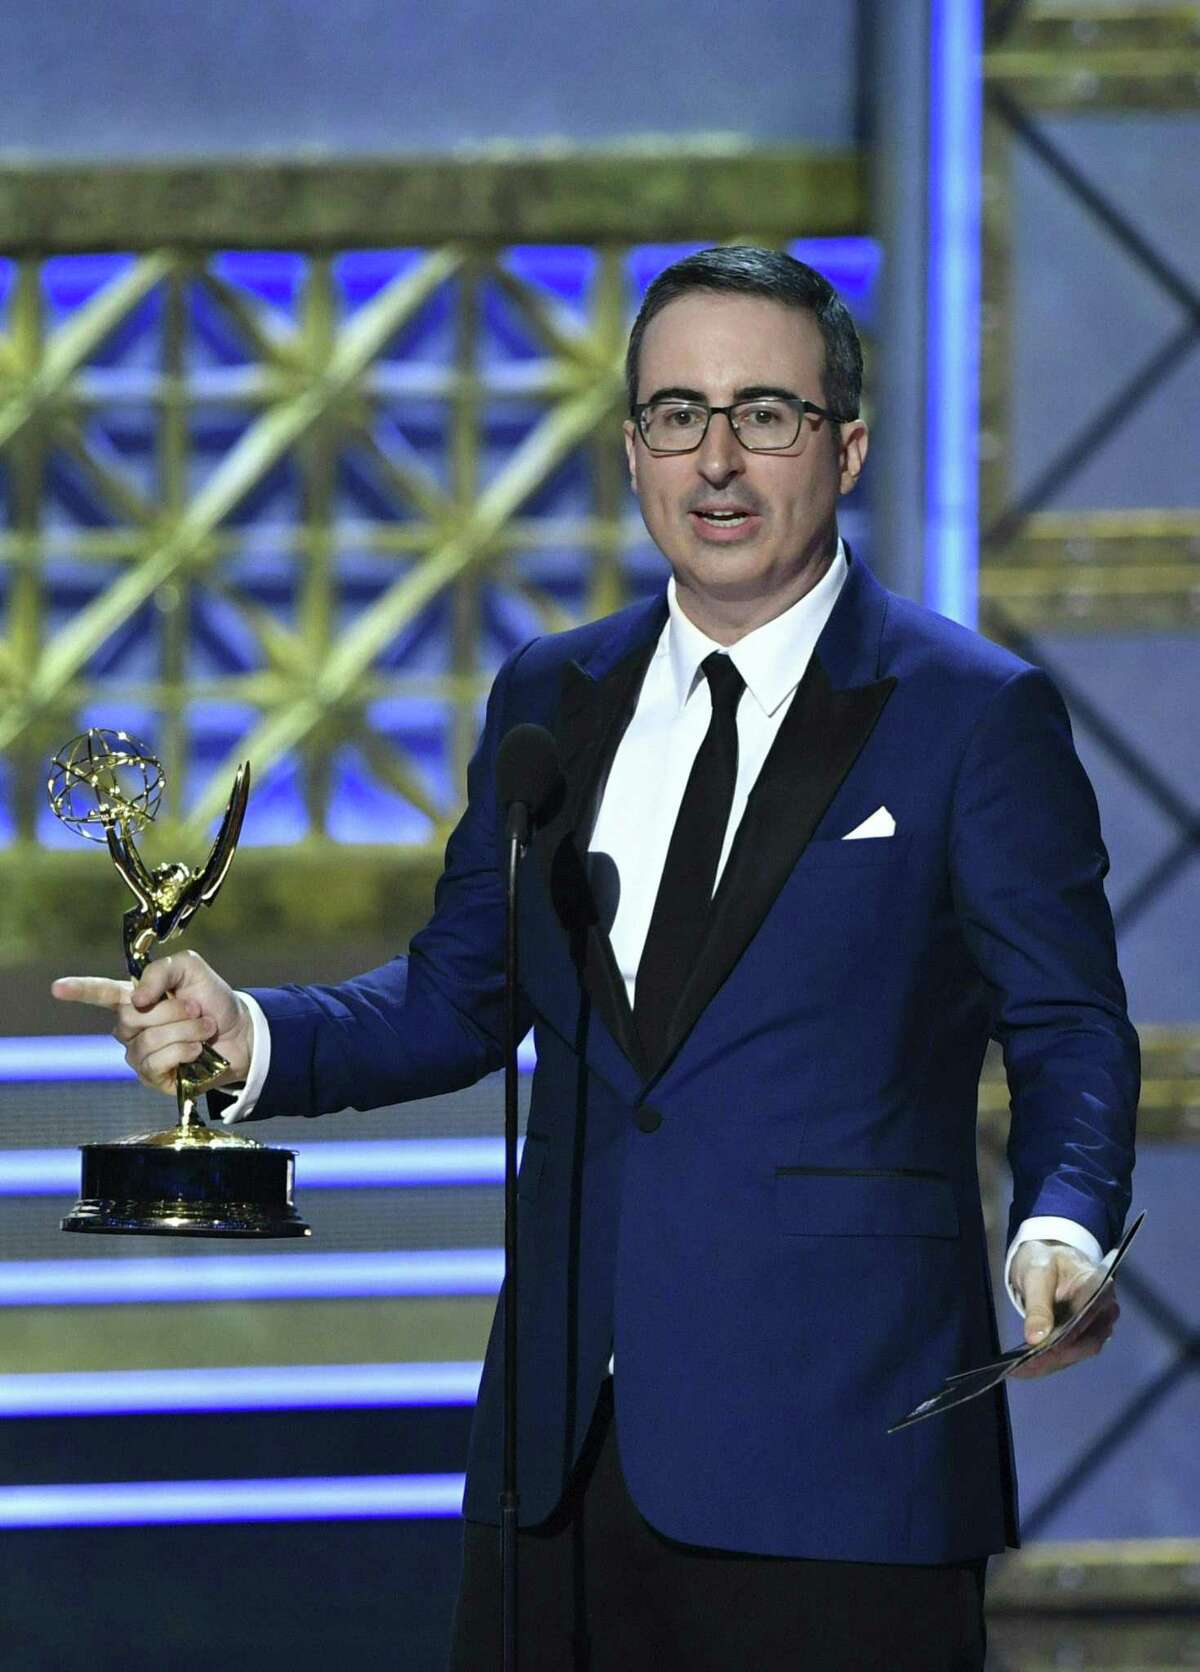 John Oliver accepts the award for Outstanding Writing for a Variety Series for “Last Week Tonight With John Oliver” inn 2017 in Los Angeles, California.